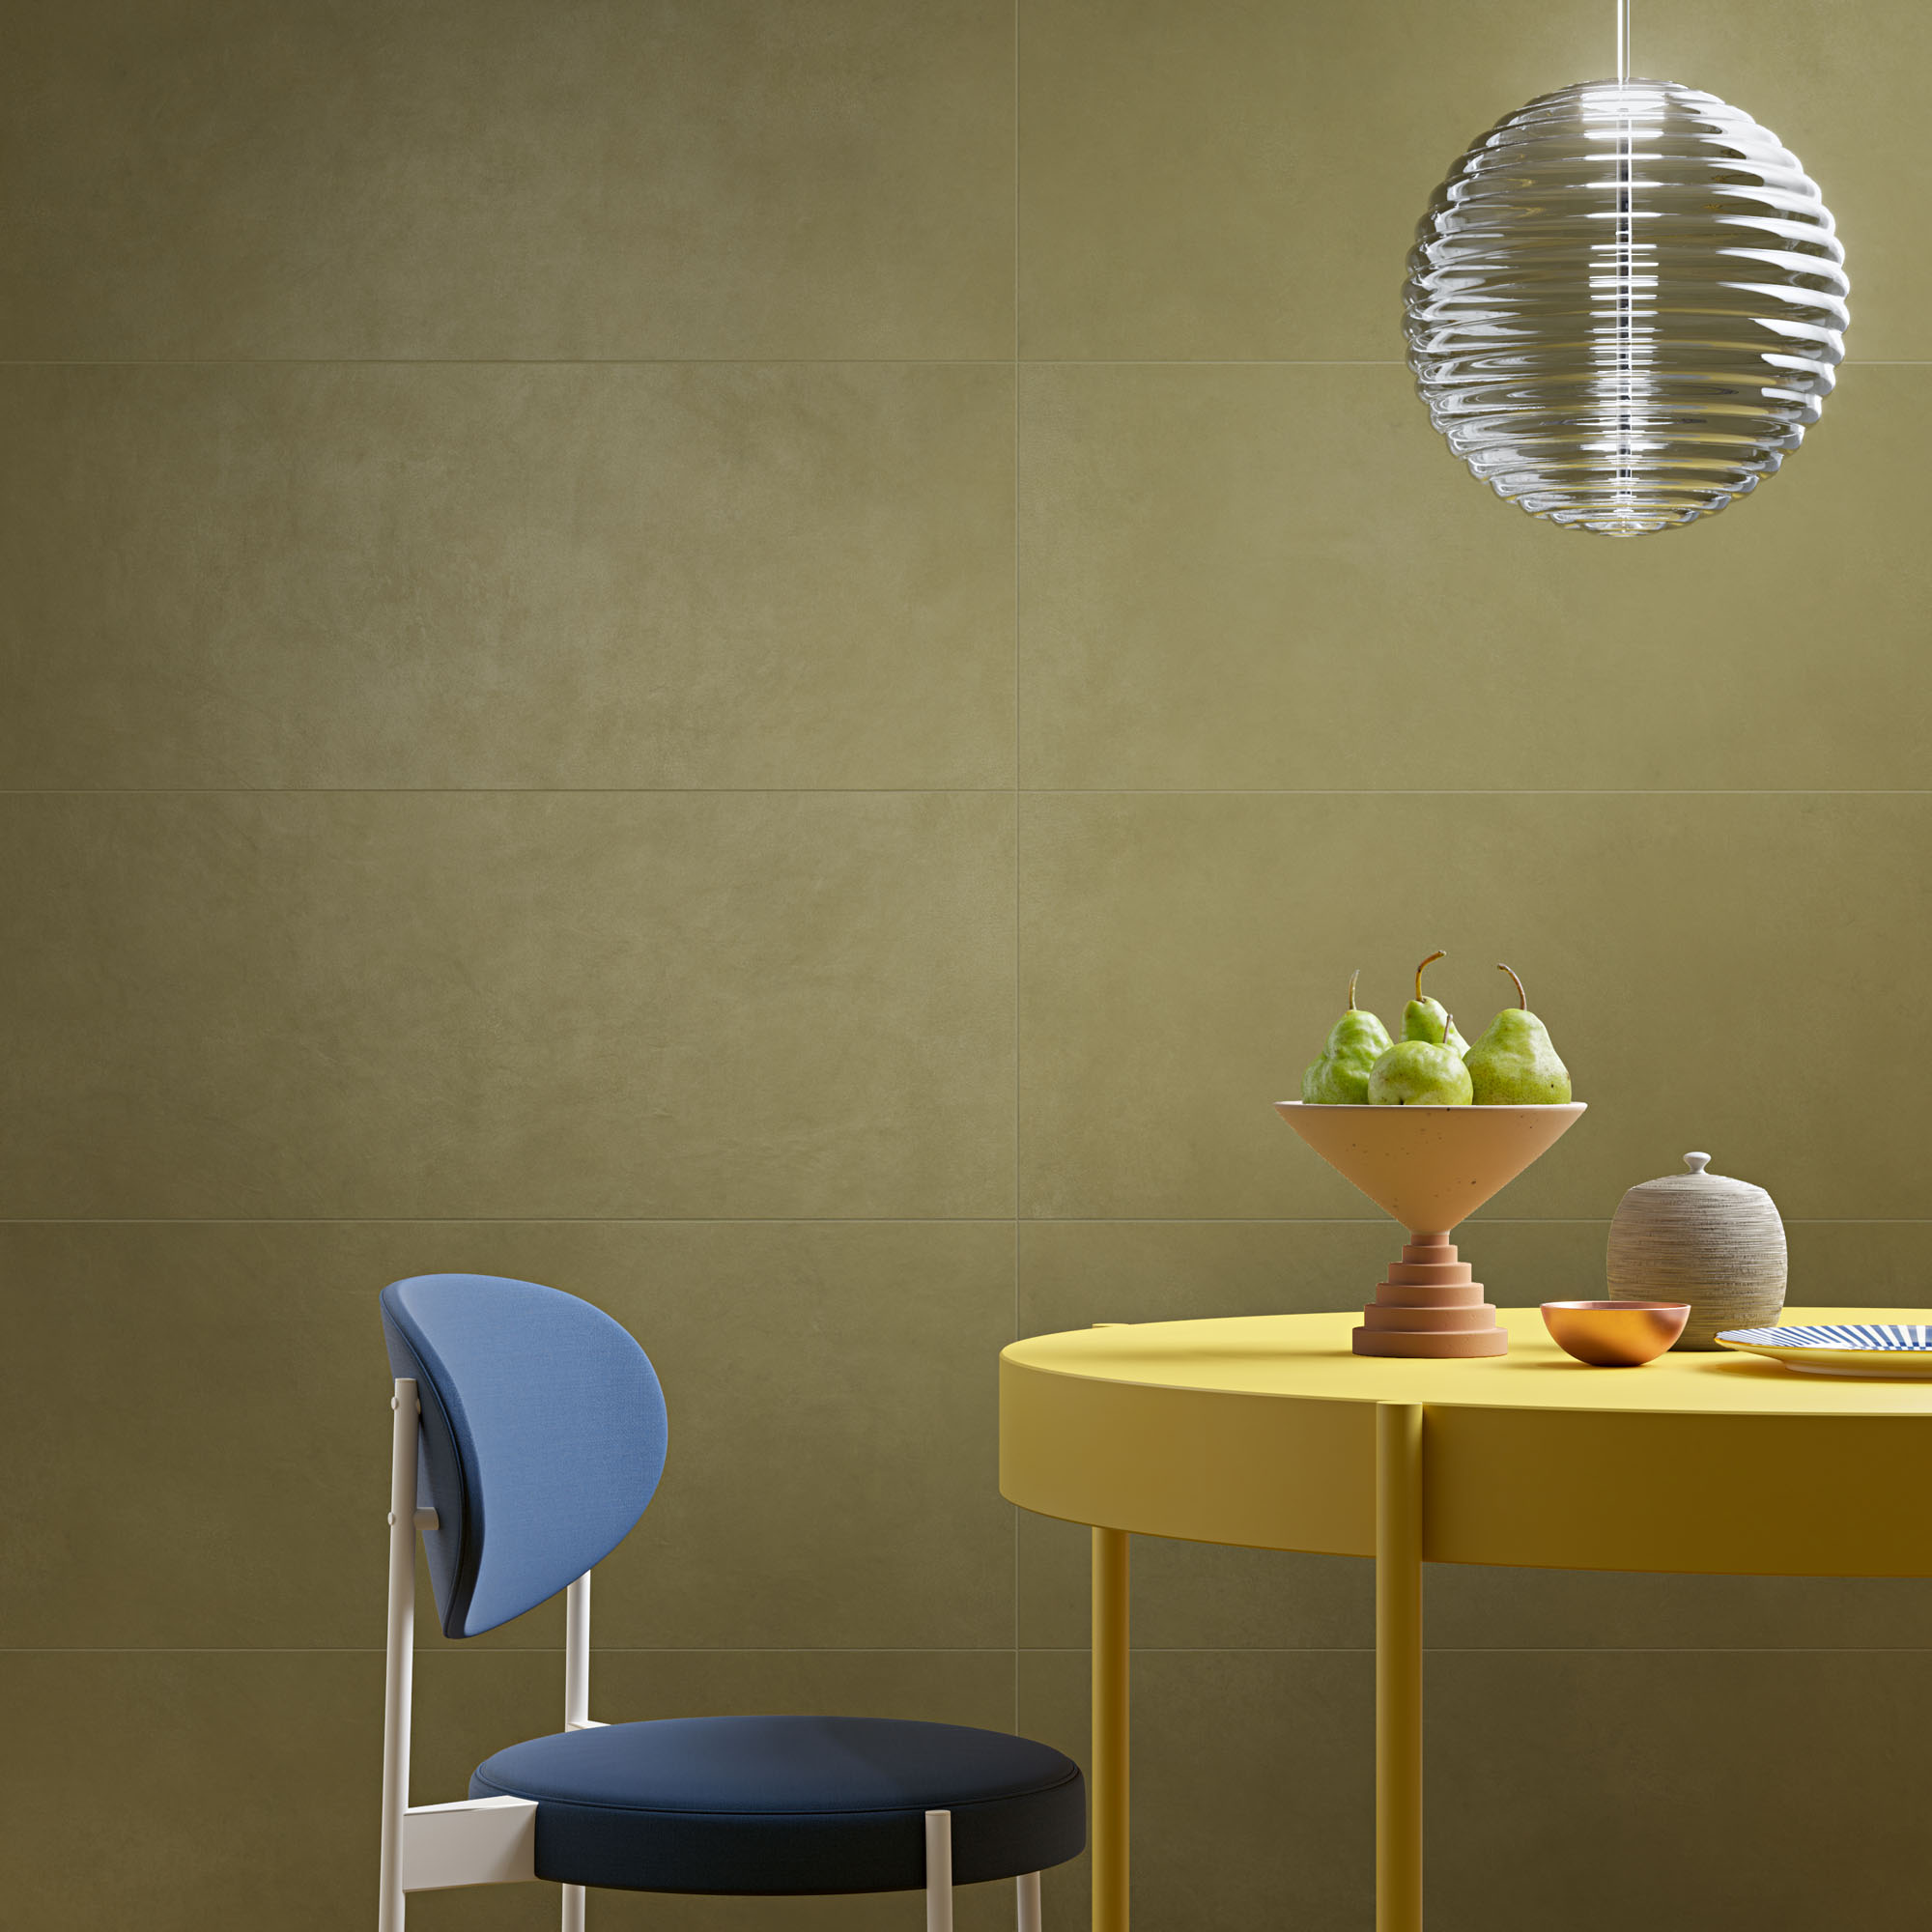 Yellow table holding pears in a bowl and a blue chair with silver pendant light in front of mustard yellow ceramic tile-clad wall.